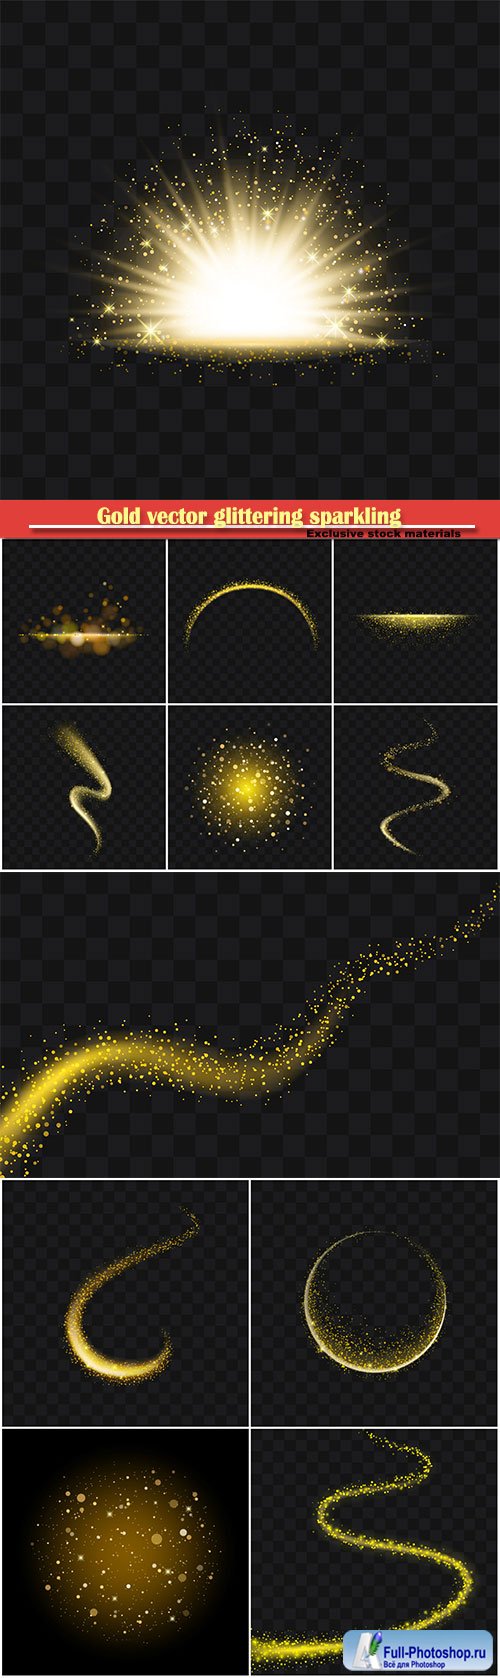 Gold vector glittering sparkling abstract particles on background